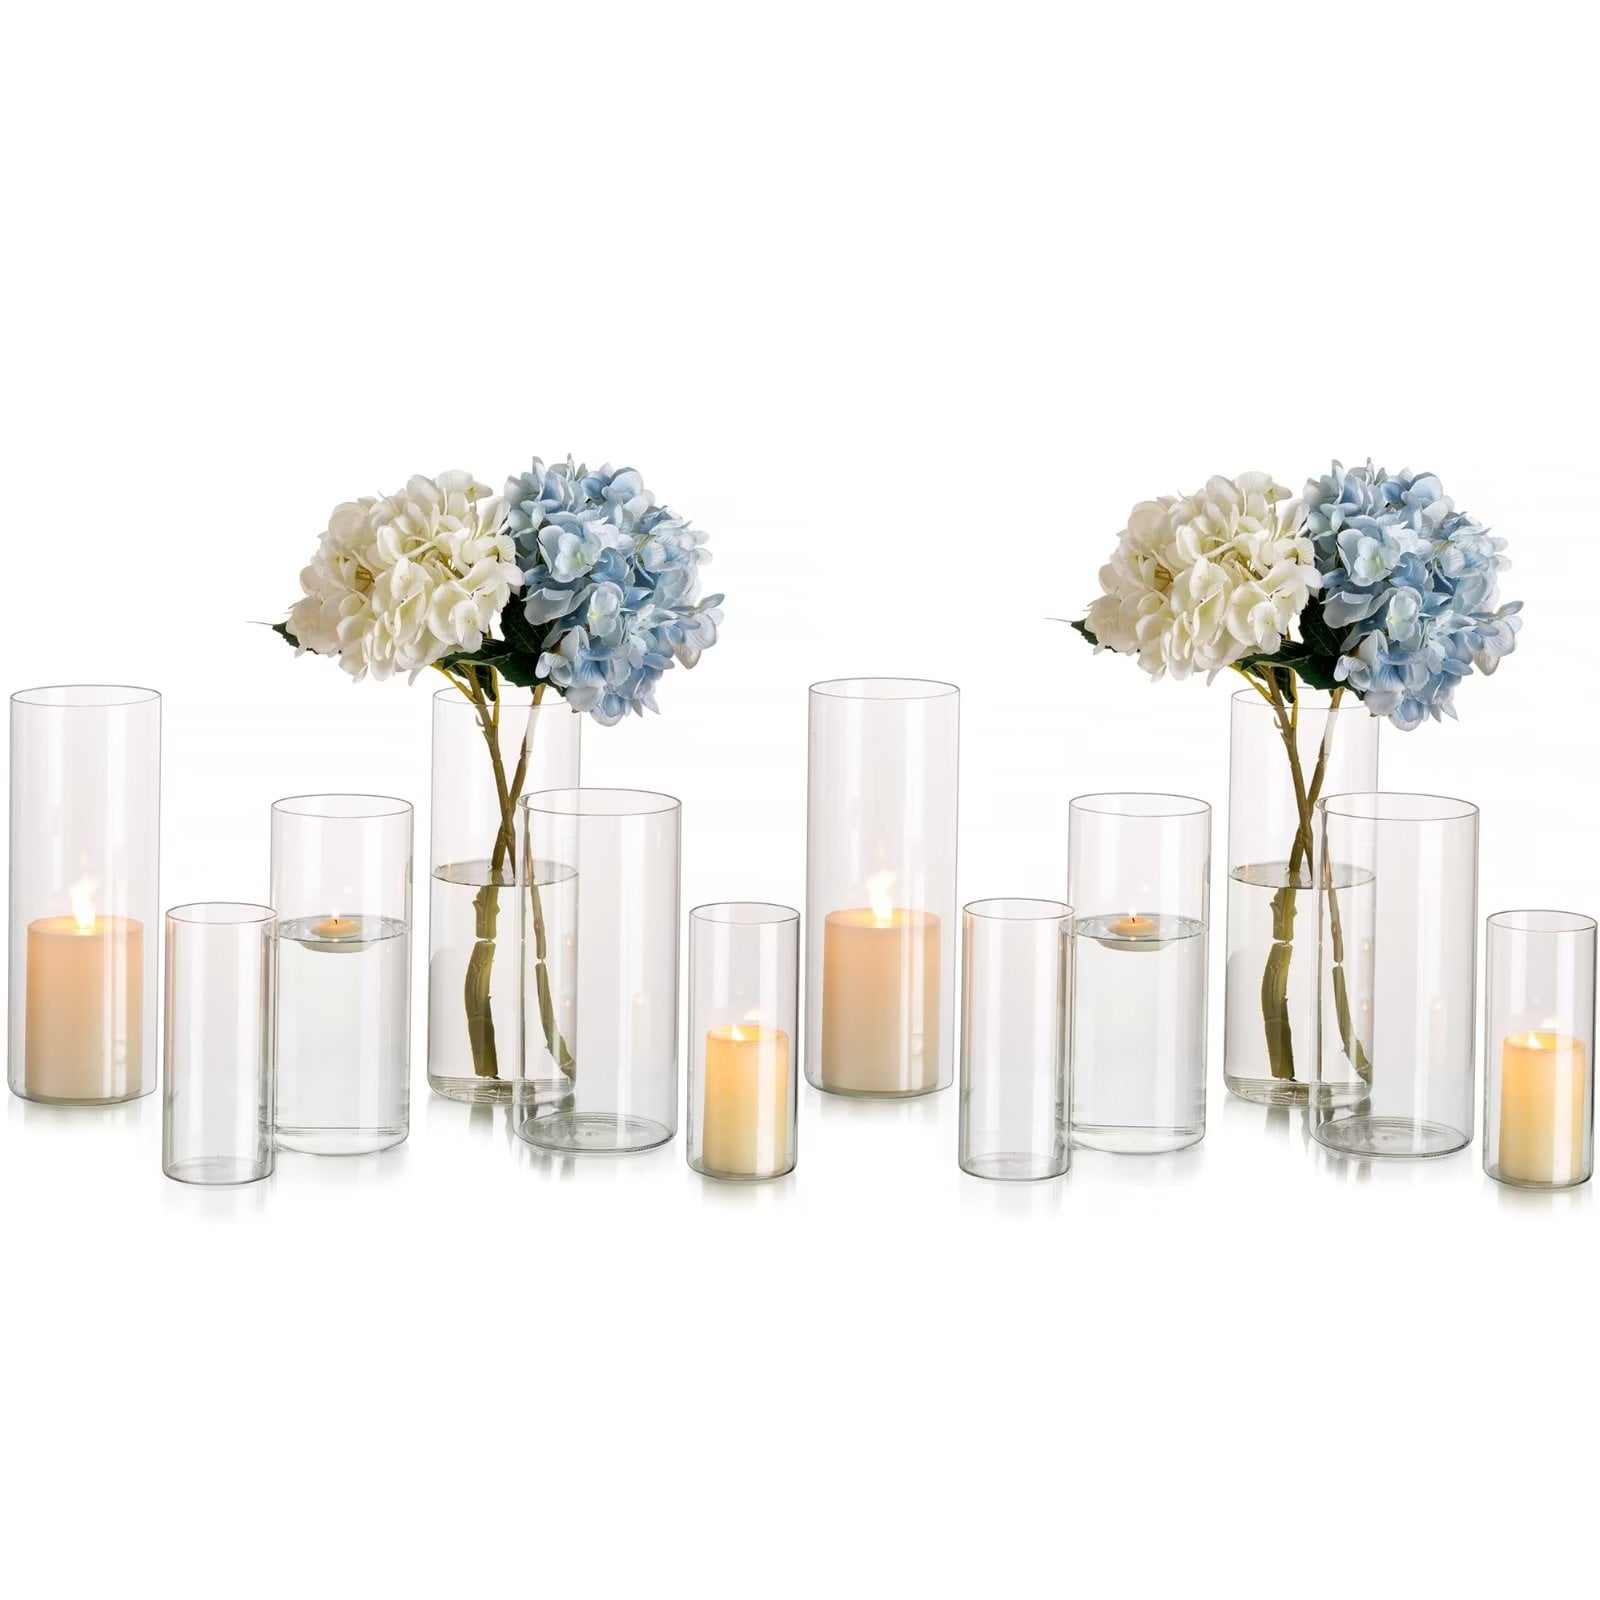 Mother's Day Gifts Decoration Clear Glass Cylinder Vases Set of 12 Bulk Flower Vase for Wedding Table Centerpieces 6", 8" & 10"H - image 1 of 9